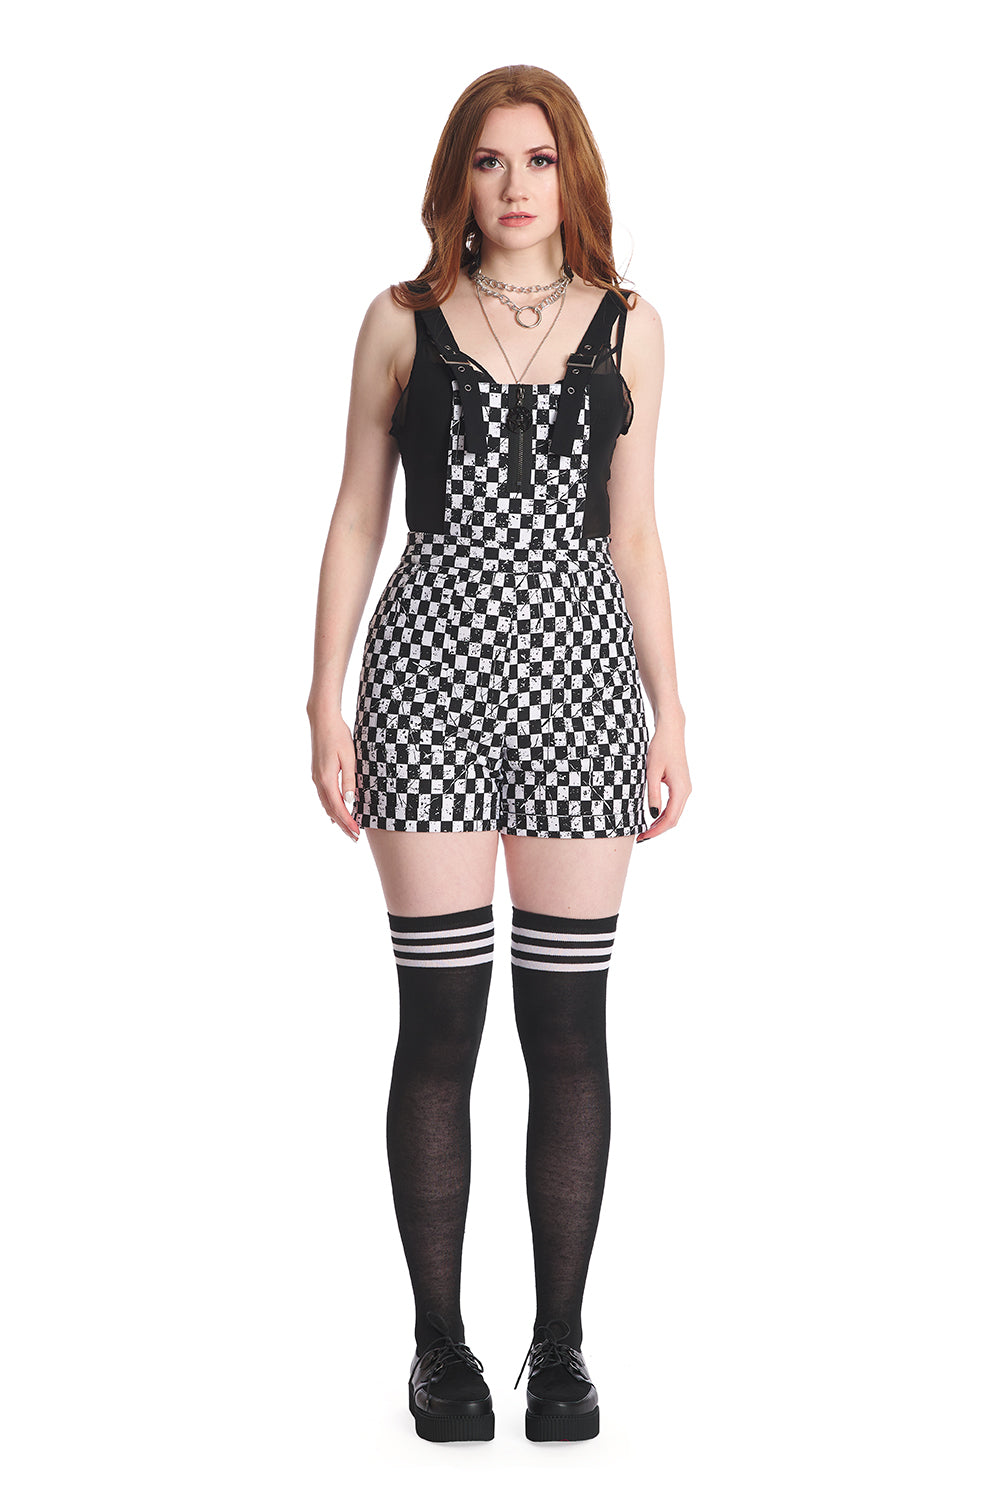 Model in a black and white checkerboard playsuit with thigh high socks